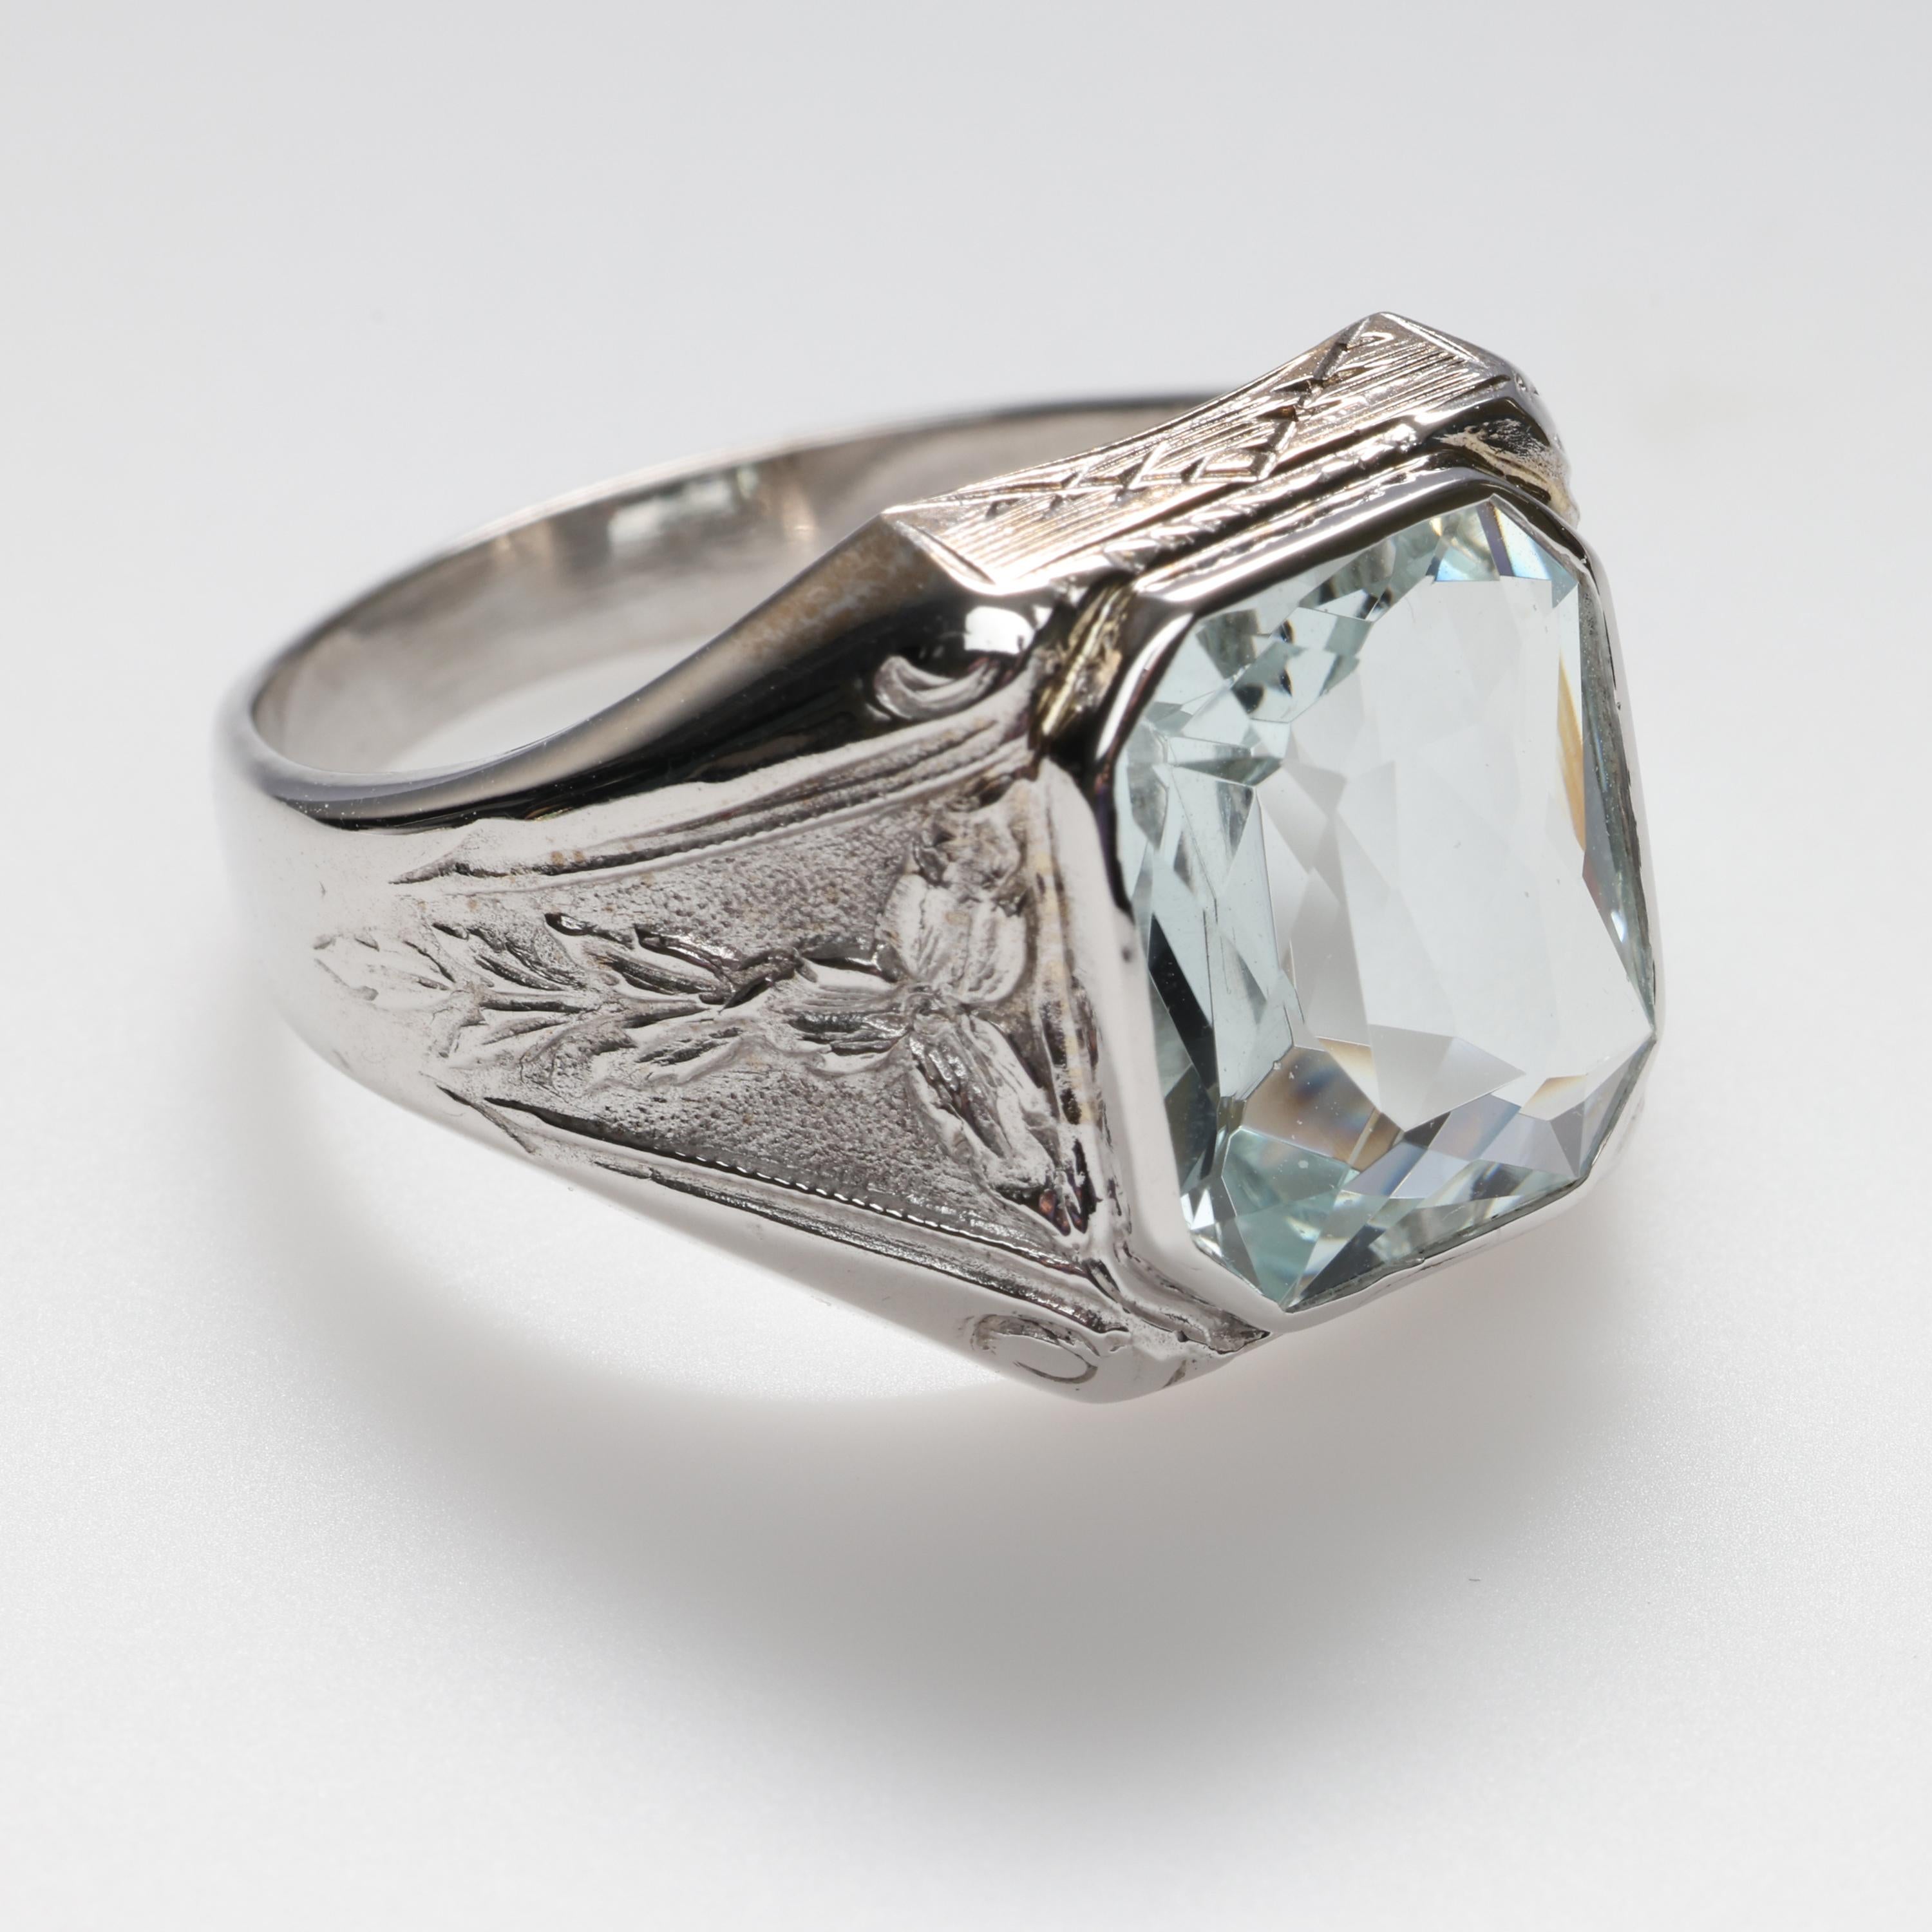 This classic, forever stylish men's ring was crafted in sturdy 10K white gold and features a 5 carat fancy rectangular-cut natural aquamarine gem. The 12.8 x 11mm natural gemstone is very pale blue and displays impressive flash and fire. But do not